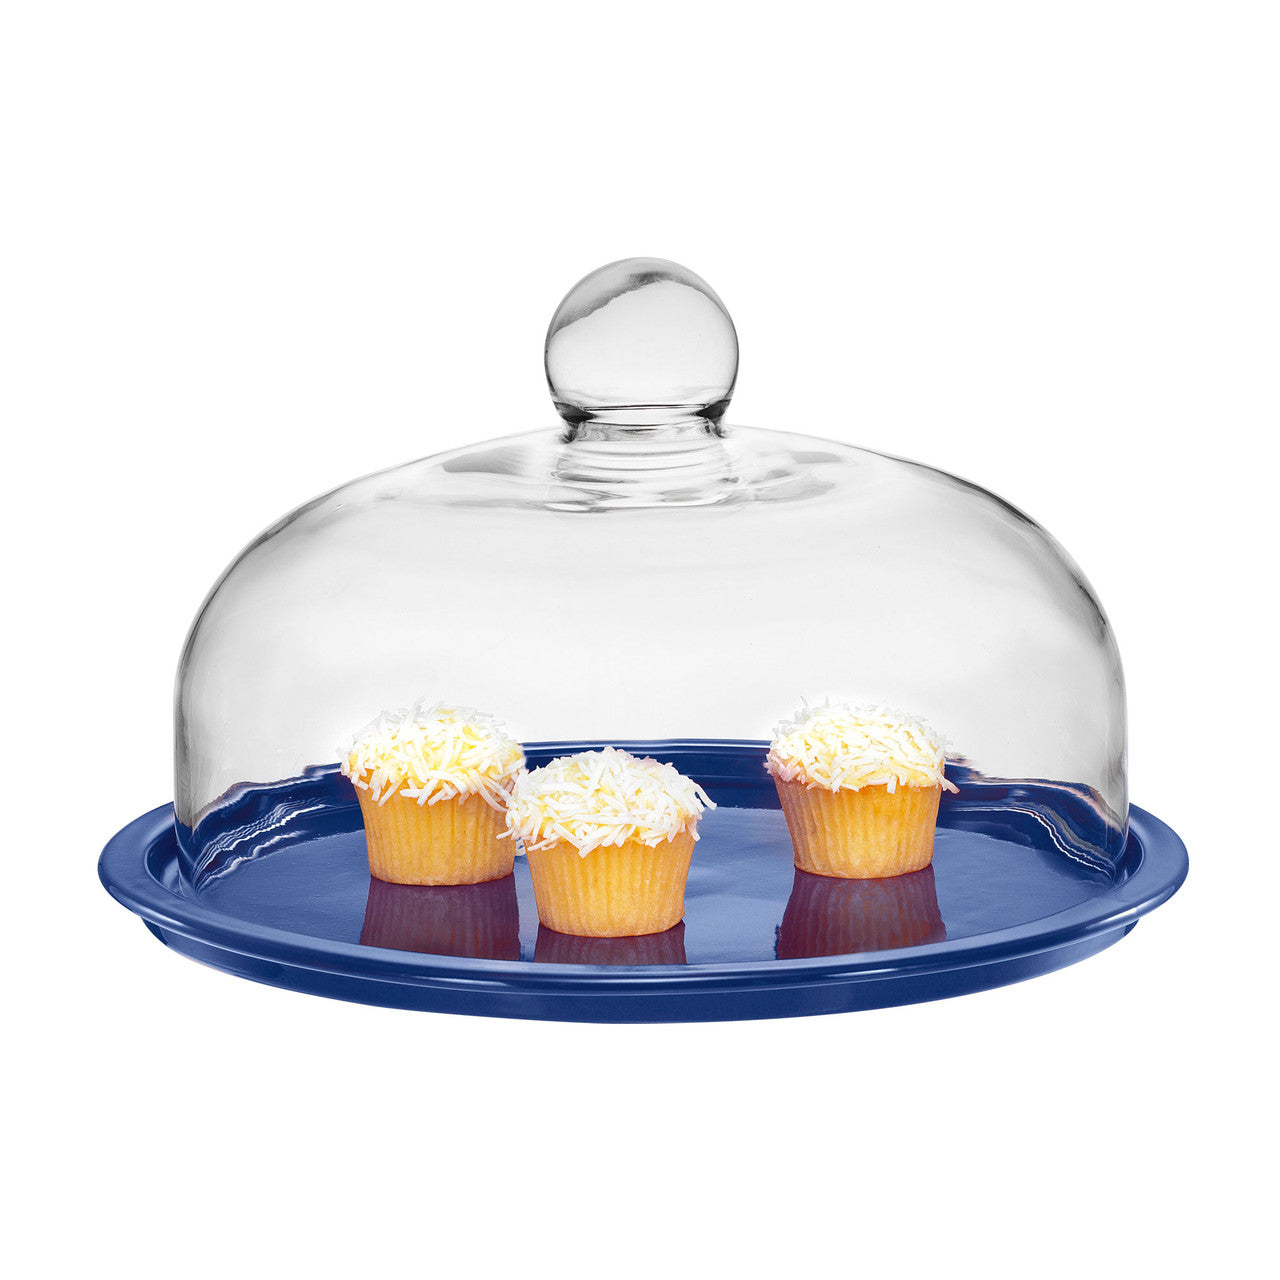 Chasseur - CAKE PLATTER - 29.5CM WITH GLASS LID -  BLUE